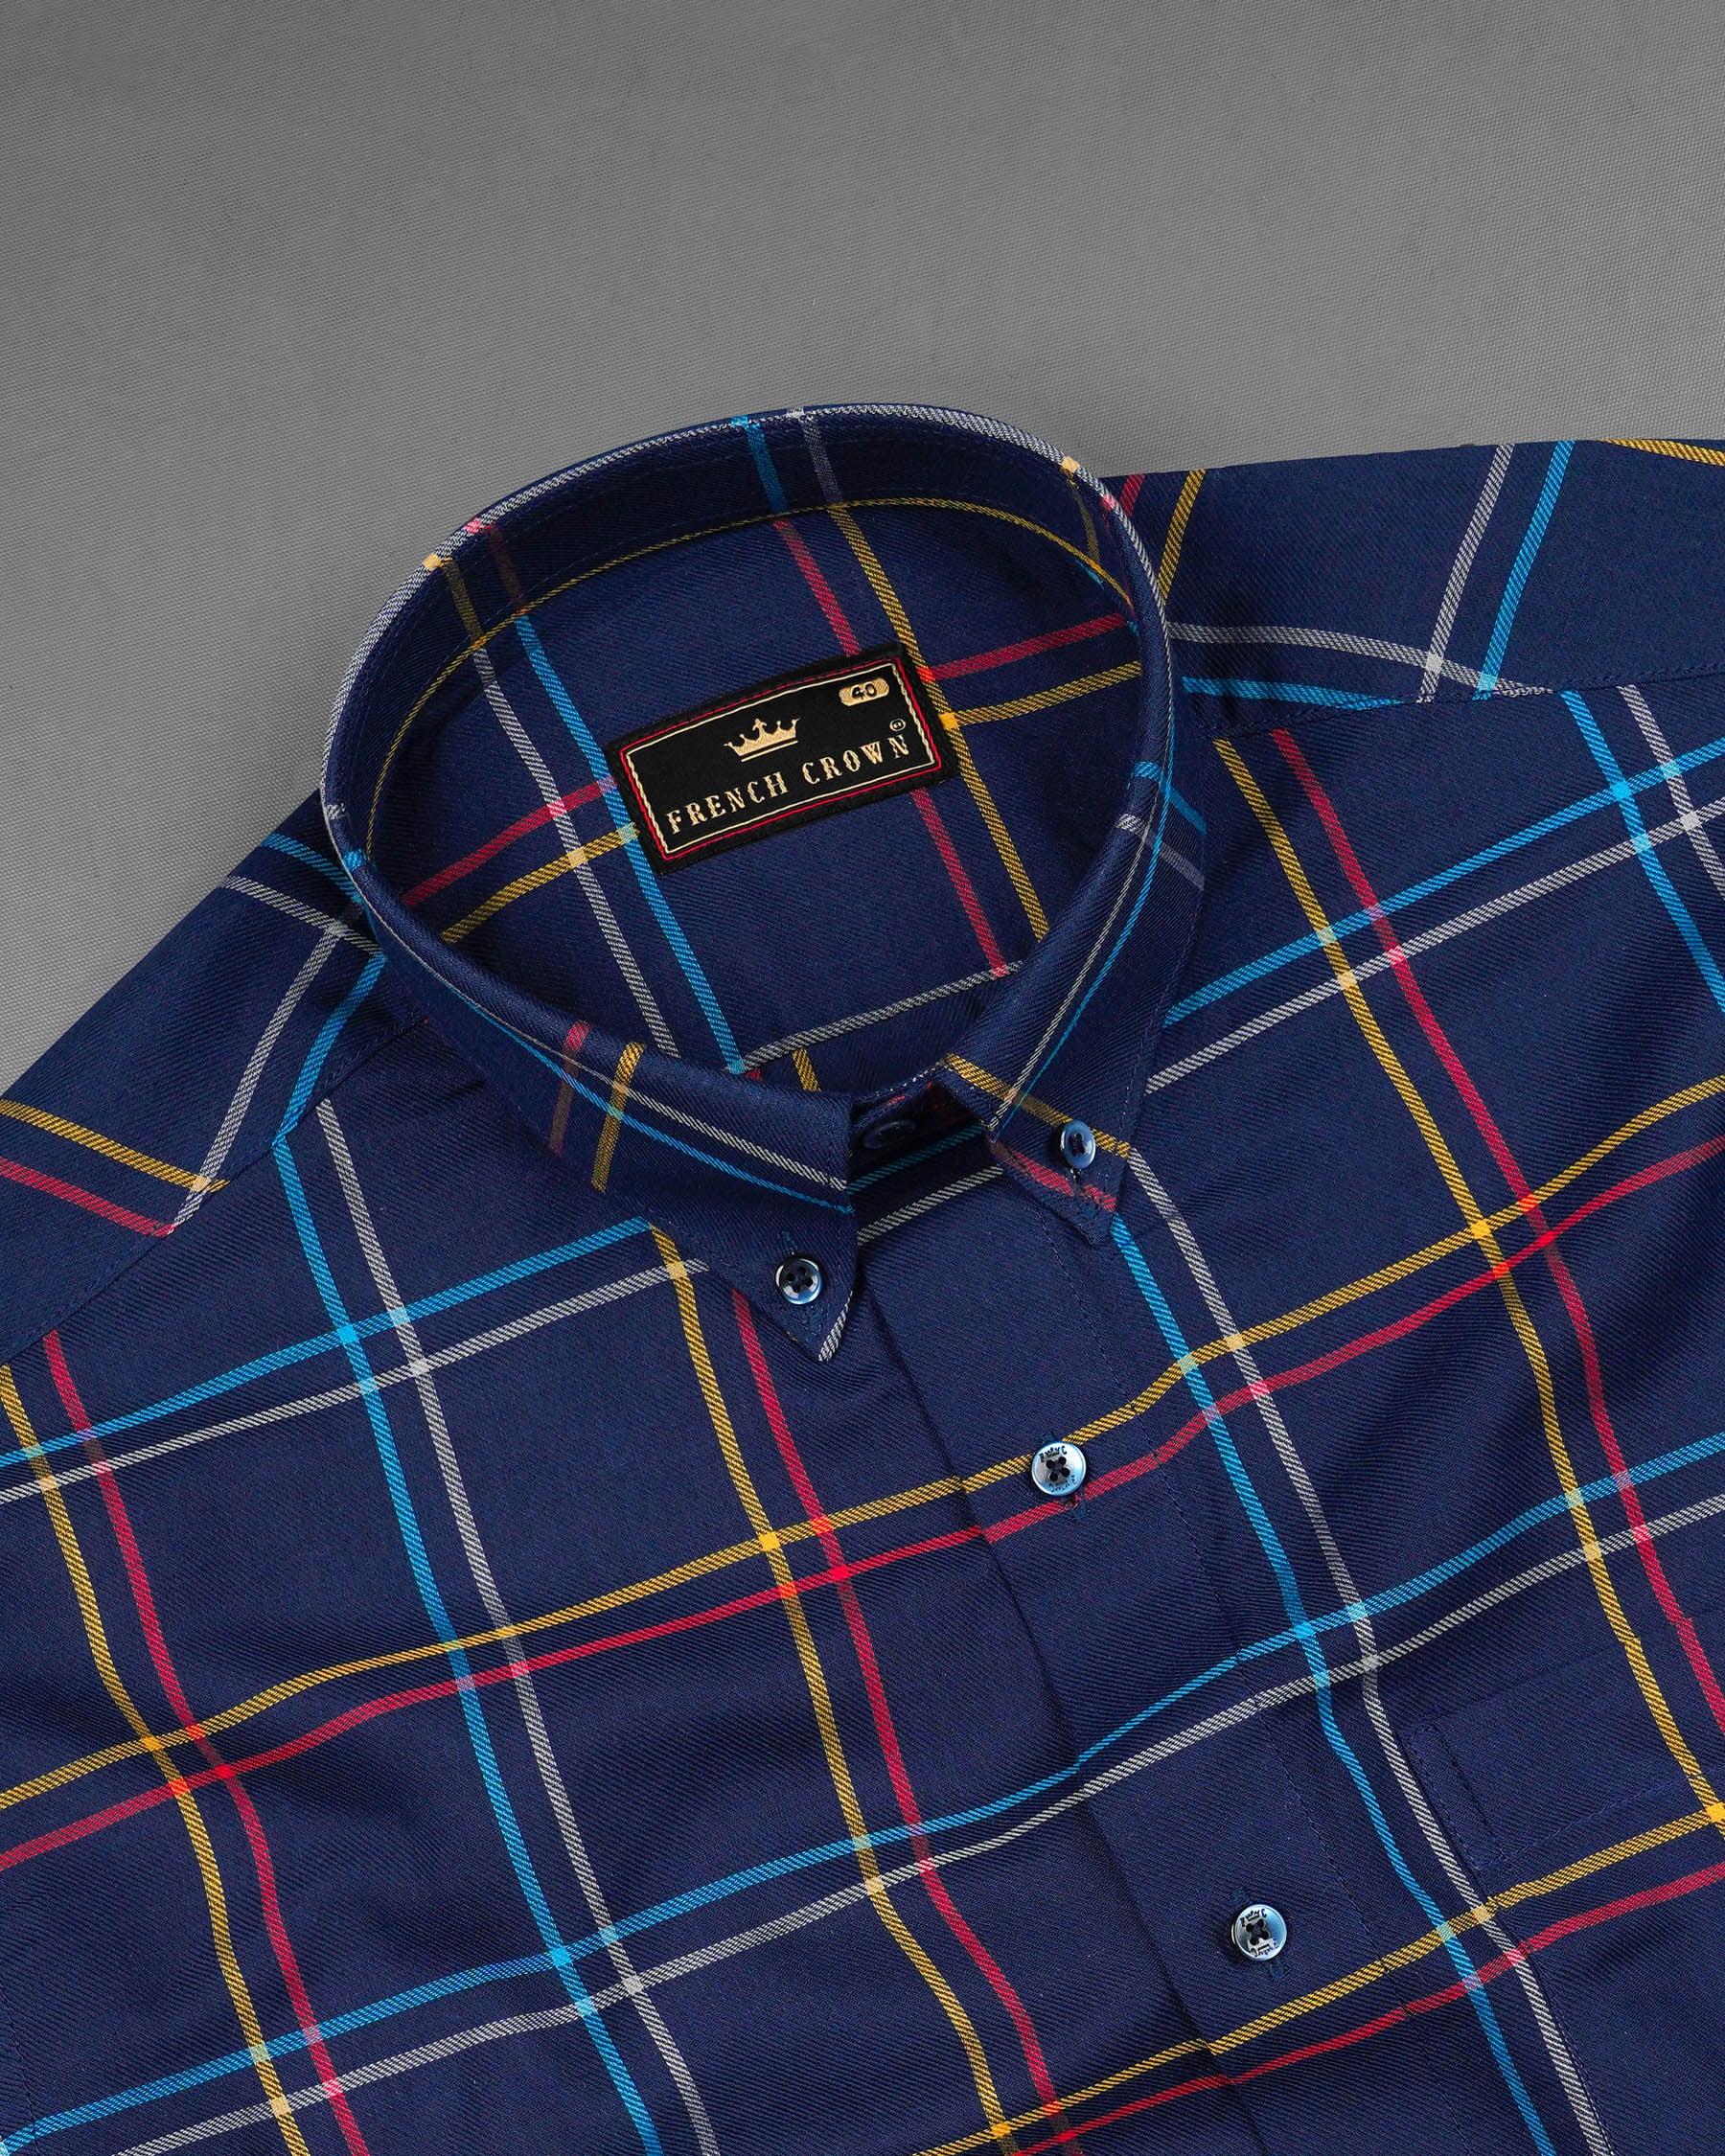 Firefly Navy Blue with Dixie Yellow and Carmine Red Twill Windowpane Premium Cotton Shirt 8042-BD-BLE-38, 8042-BD-BLE-H-38, 8042-BD-BLE-39,8042-BD-BLE-H-39, 8042-BD-BLE-40, 8042-BD-BLE-H-40, 8042-BD-BLE-42, 8042-BD-BLE-H-42, 8042-BD-BLE-44, 8042-BD-BLE-H-44, 8042-BD-BLE-46, 8042-BD-BLE-H-46, 8042-BD-BLE-48, 8042-BD-BLE-H-48, 8042-BD-BLE-50, 8042-BD-BLE-H-50, 8042-BD-BLE-52, 8042-BD-BLE-H-52